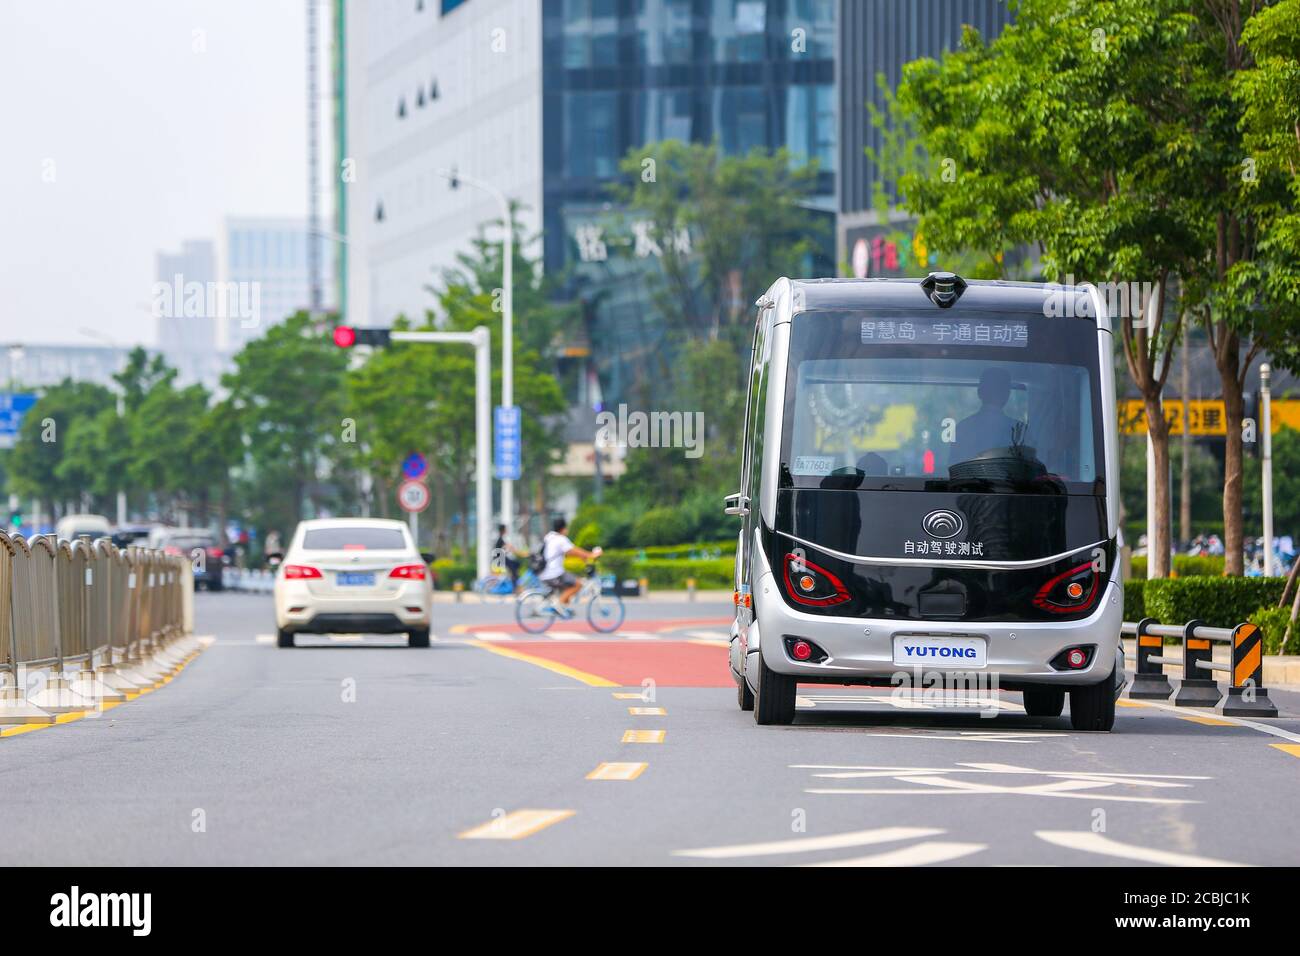 August 14, 2020, Zhengzhou, Zhengzhou, China: HenanÃ¯Â¼Å’CHINA-On August 11, 2020, henan zhengzhou, zhengdong new district give wisdom island lake loop, yutong automated driving bus has run for a year, which is based on 5 g of L4 automated driving bus have highly intelligent, driven and autonomous obstacle avoidance, patrol intersection peers such as task can be accurate, complete, can also identify ambulances, fire engines, etc and take the initiative to give way...''Smart car + smart road + ubiquitous cloud'' is bringing great changes to zhengzhou citizens' travel. Despite being in operation Stock Photo